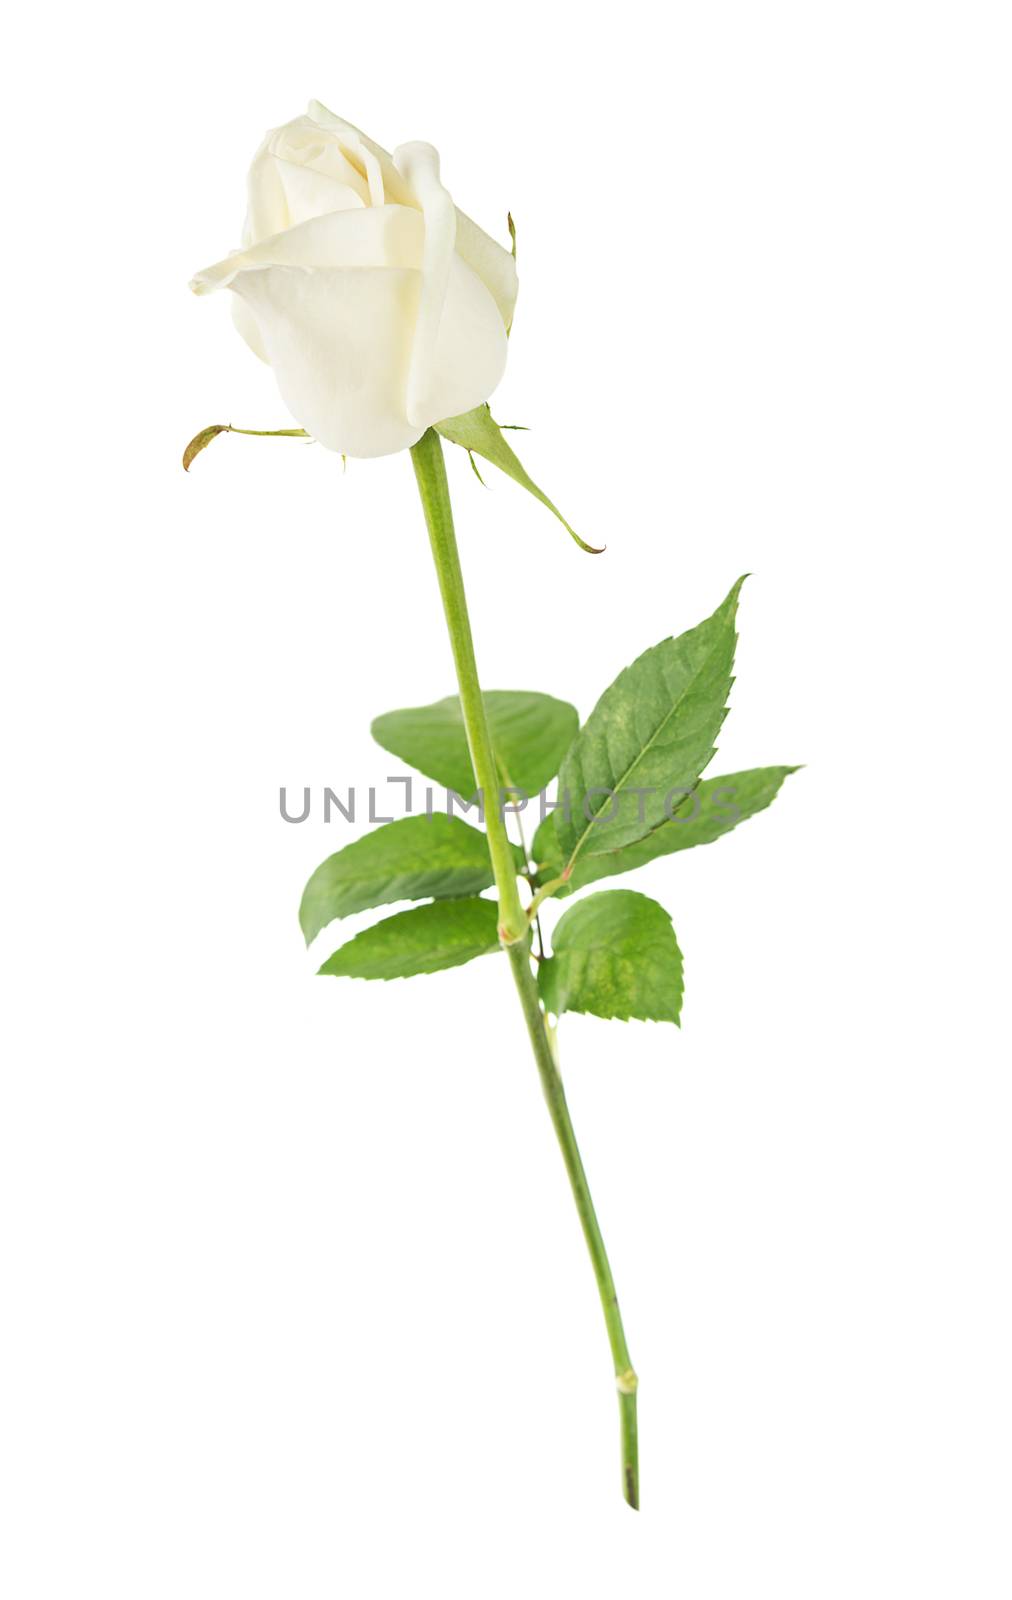 Elegant white rose on a long stem with green leaves isolated on white background, side view